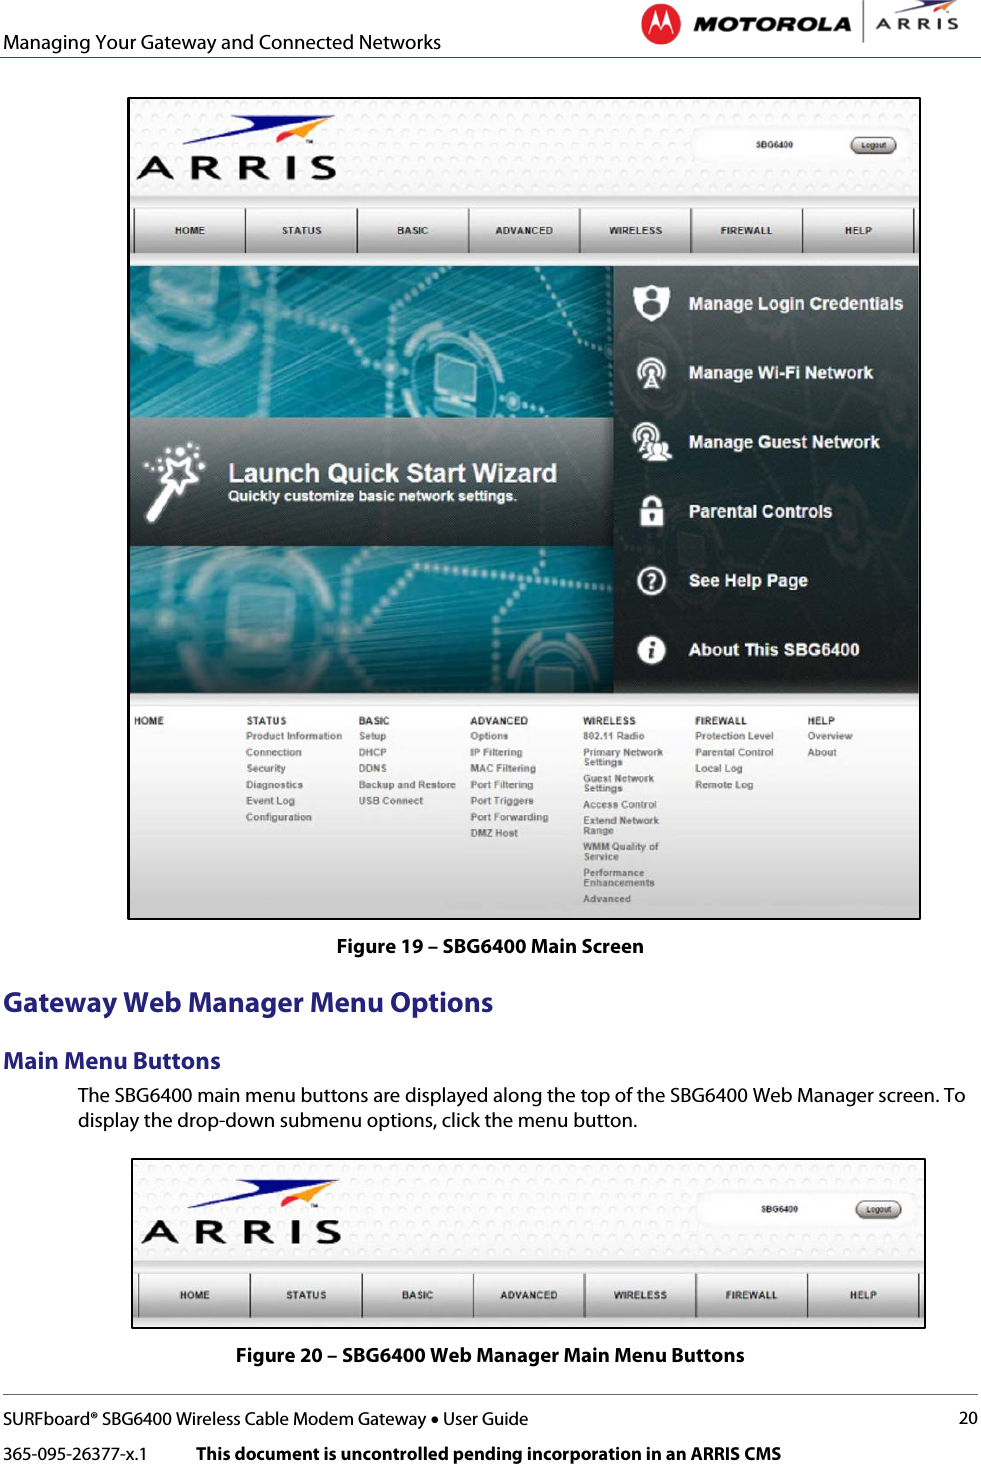 Managing Your Gateway and Connected Networks   SURFboard® SBG6400 Wireless Cable Modem Gateway • User Guide 20 365-095-26377-x.1            This document is uncontrolled pending incorporation in an ARRIS CMS   Figure 19 – SBG6400 Main Screen Gateway Web Manager Menu Options Main Menu Buttons The SBG6400 main menu buttons are displayed along the top of the SBG6400 Web Manager screen. To display the drop-down submenu options, click the menu button.  Figure 20 – SBG6400 Web Manager Main Menu Buttons 